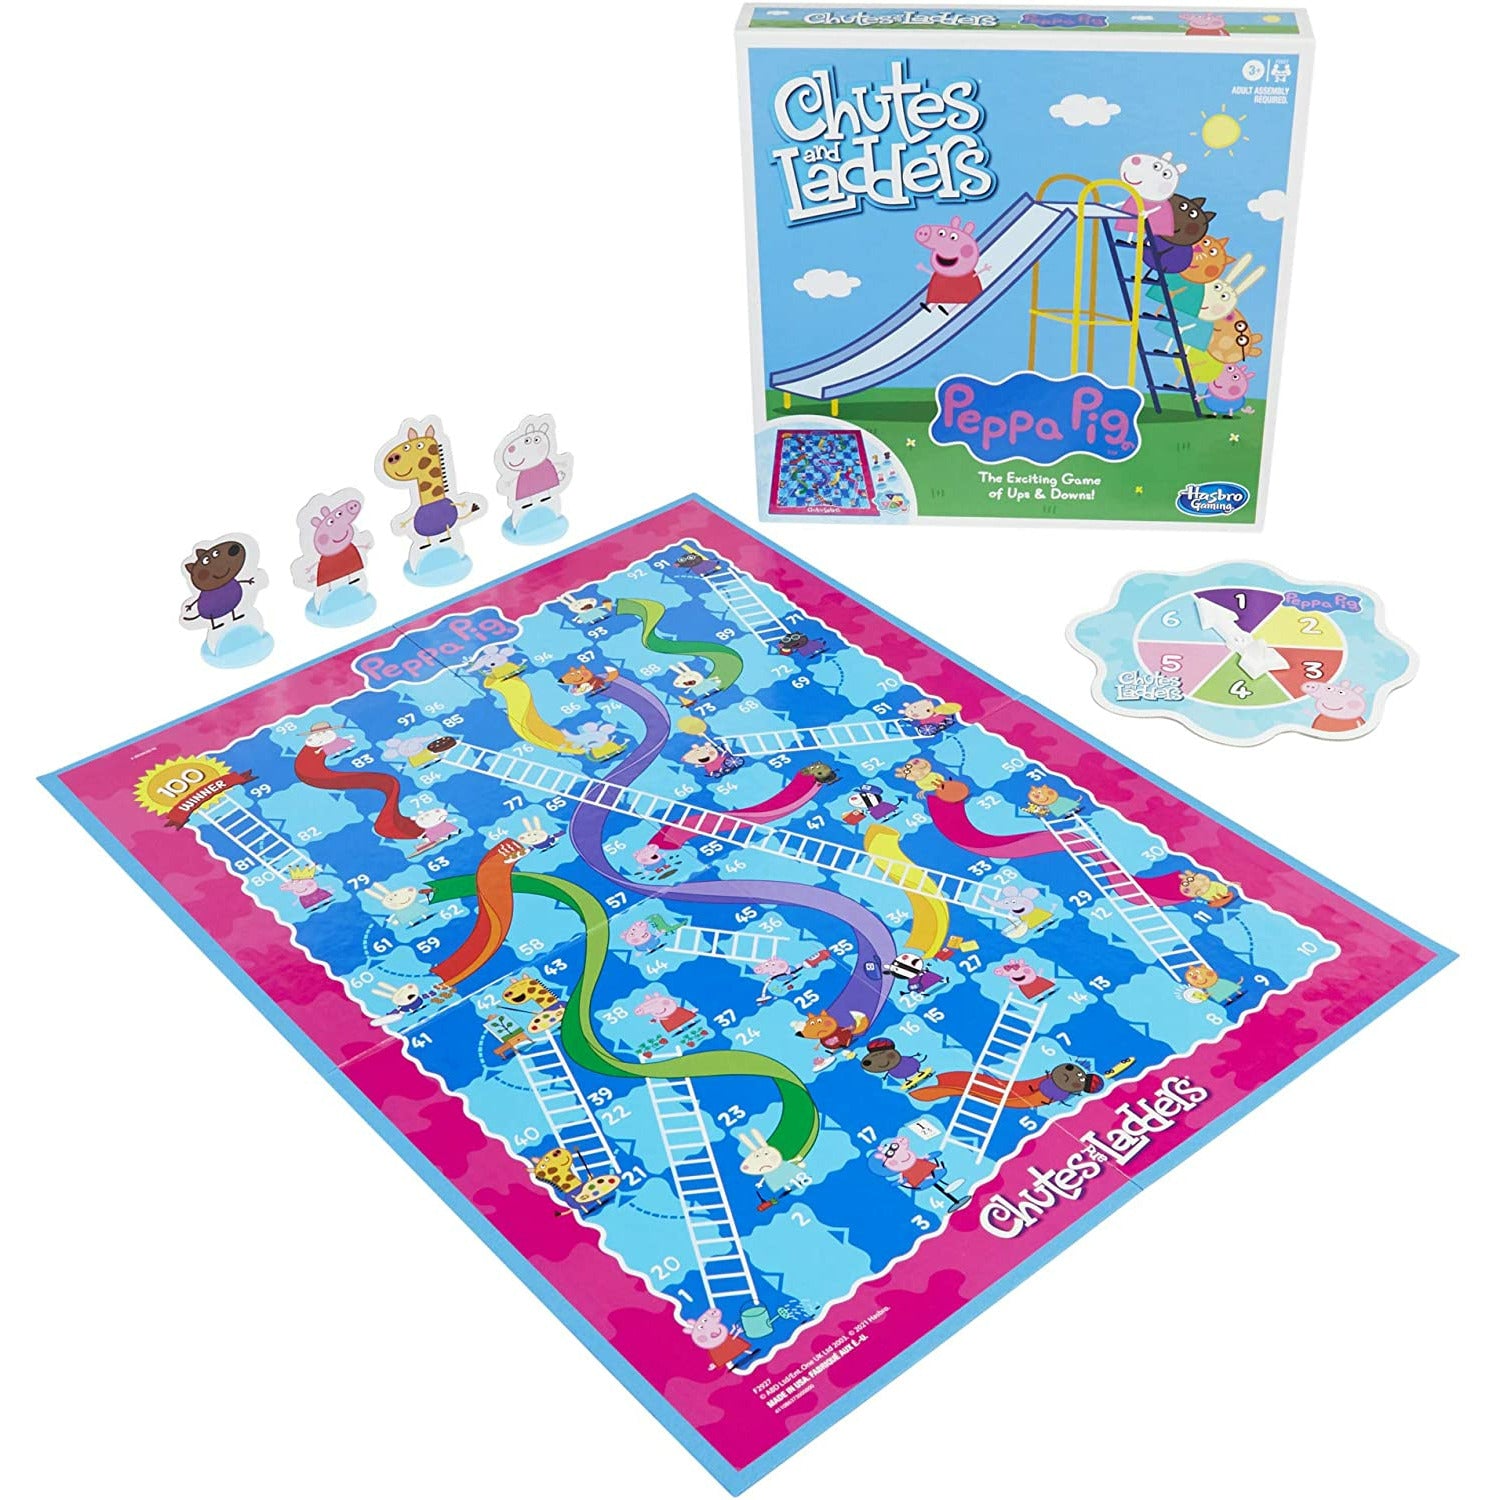 Peppa Pig Edition Chutes and Ladder Board Game